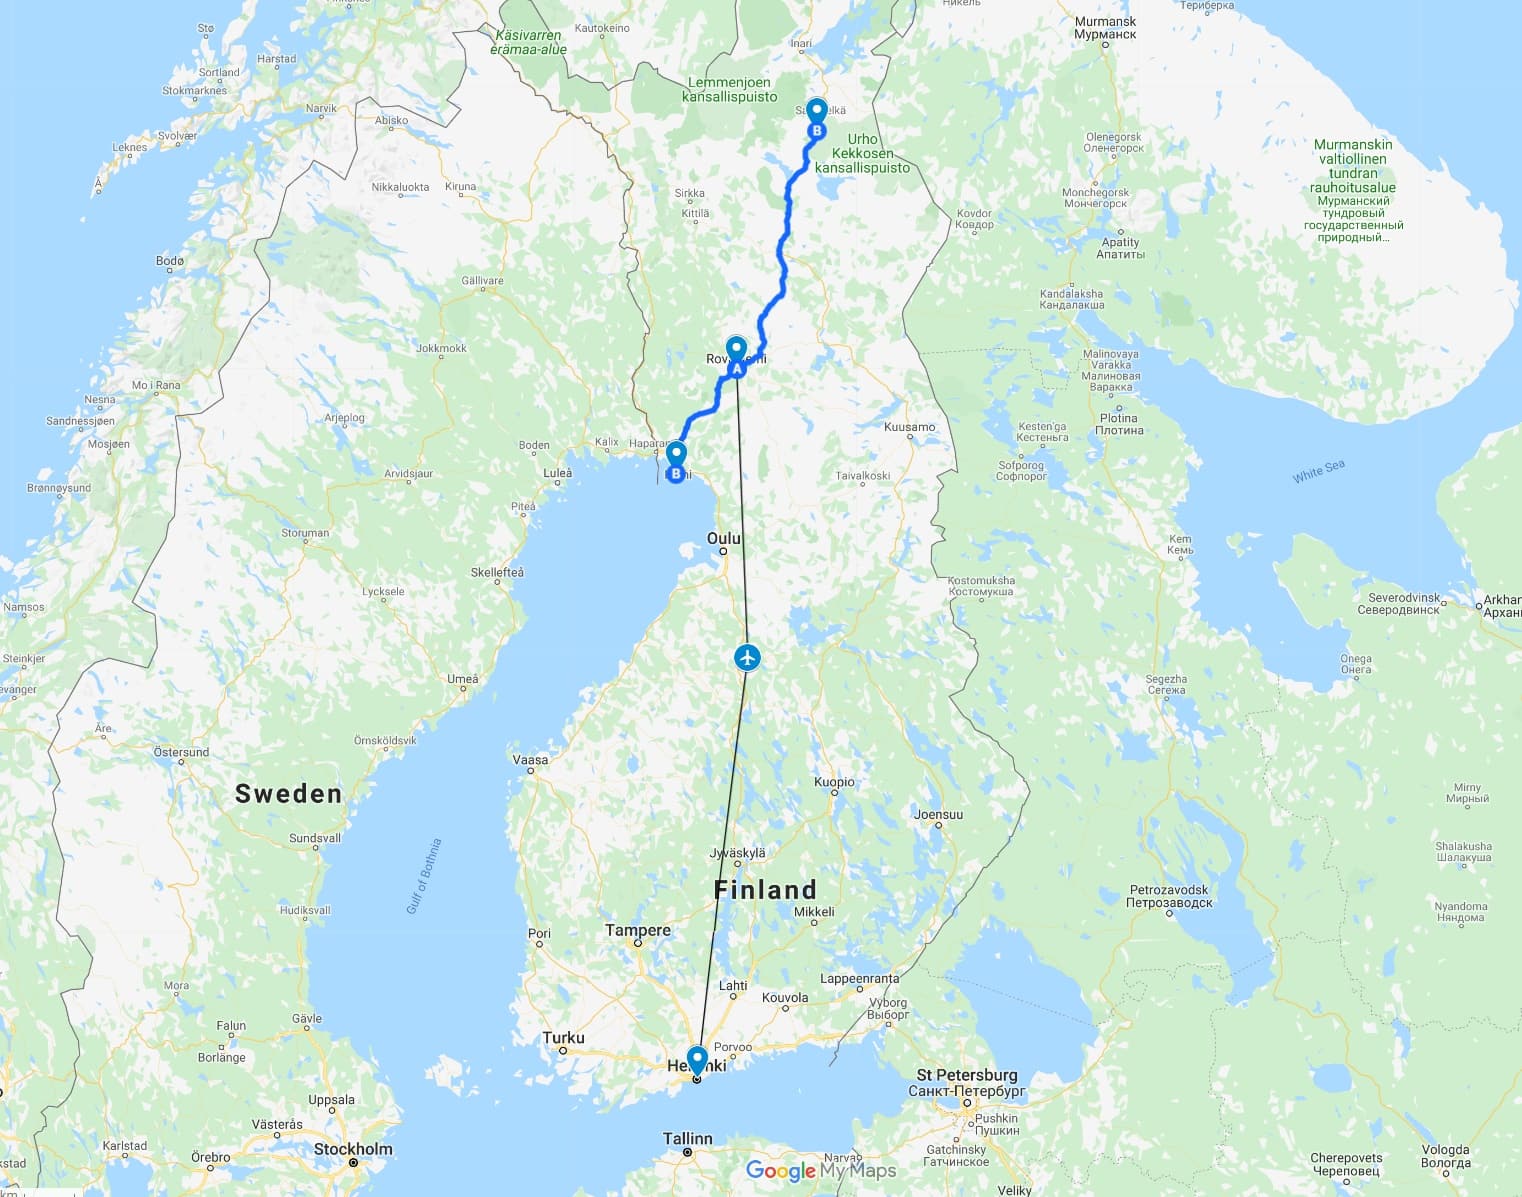 The Ultimate 7 Day Finnish Lapland Itinerary for Winter + Map and Tips